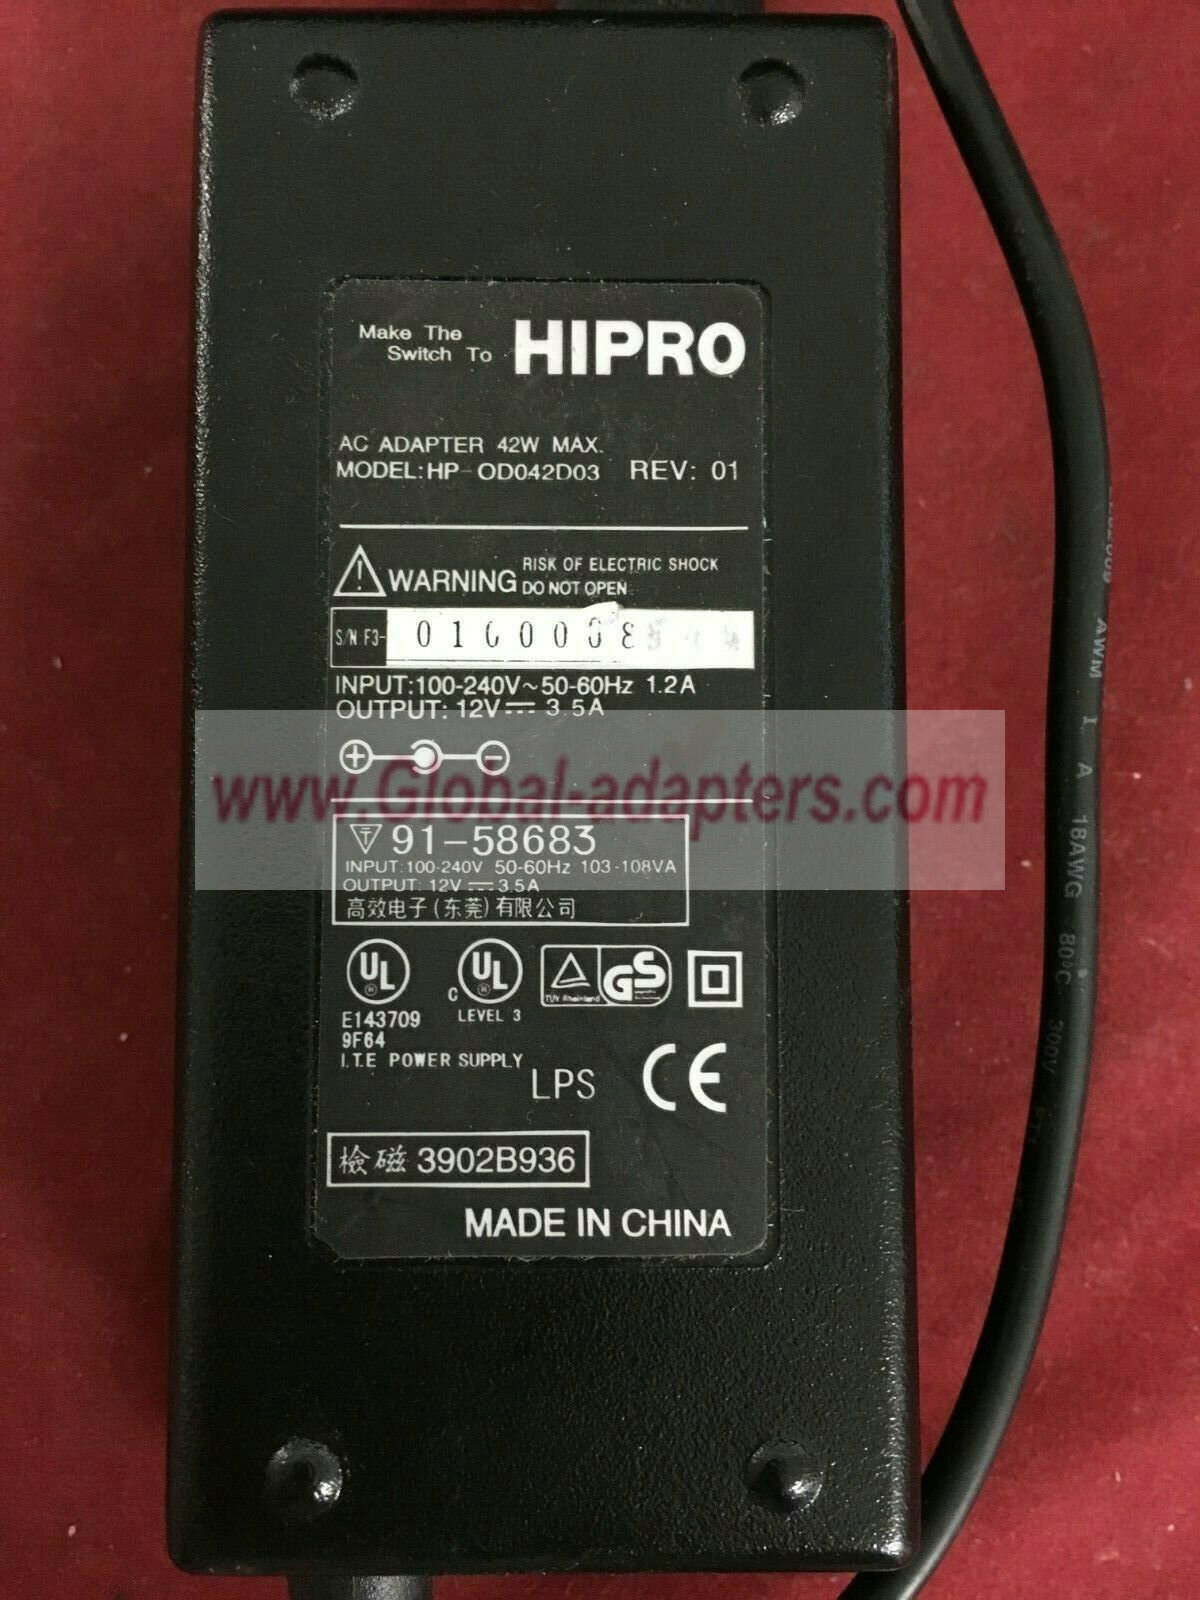 NEW 12V 3.5A Hipro HP-OD042D03 AC Adapter